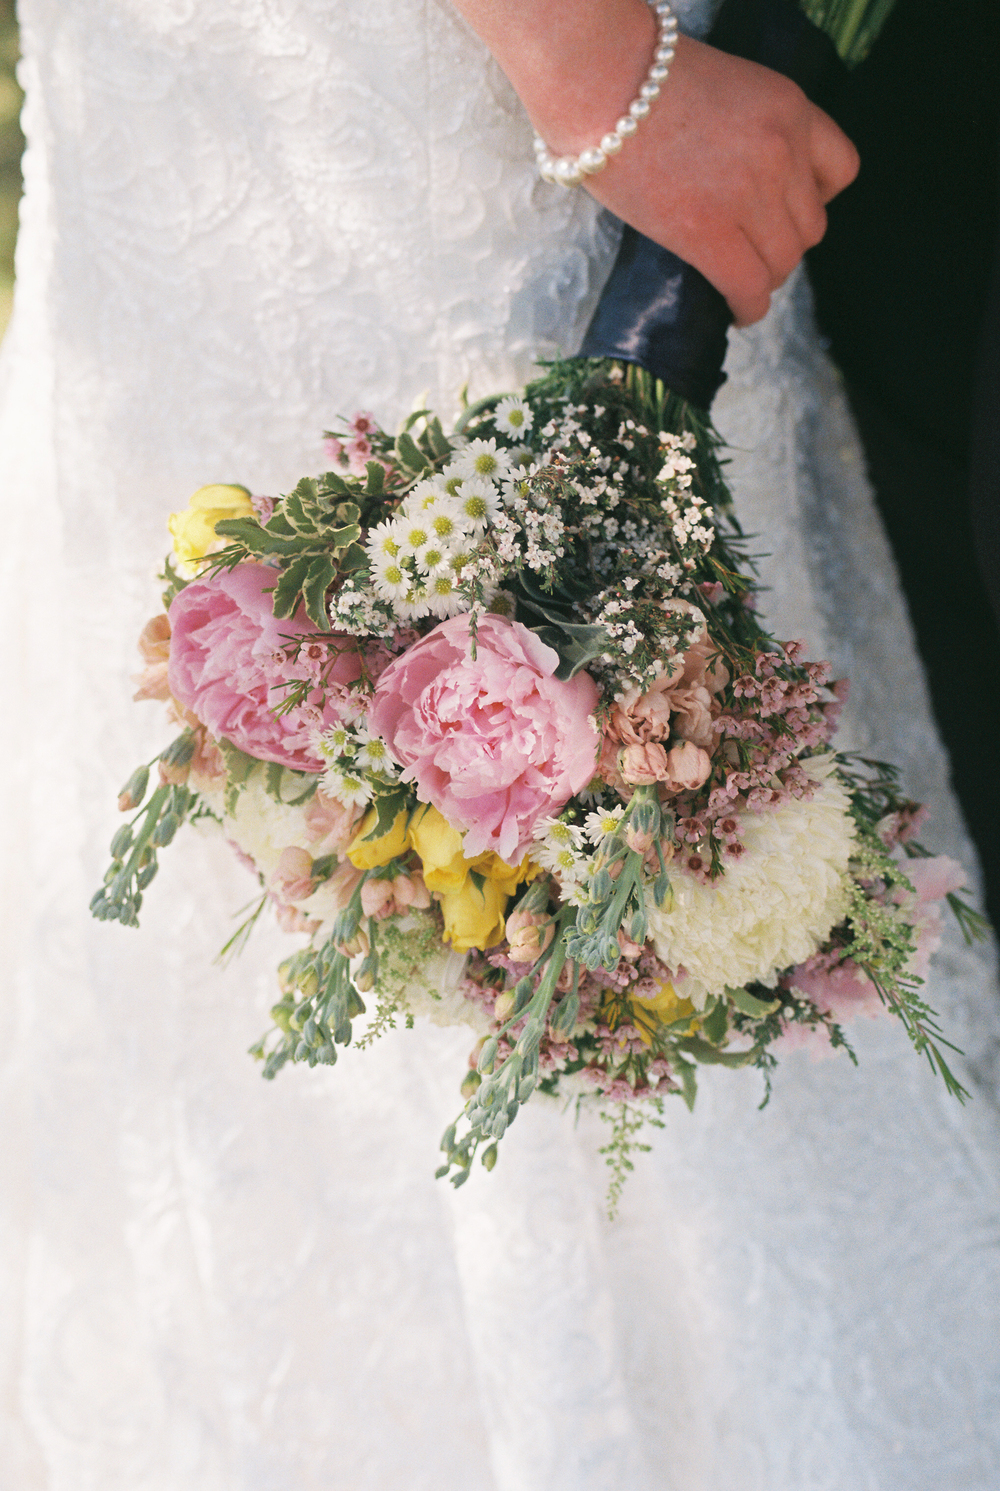 I took some photos at a recent wedding and adore this image. The colors, the grain. Swoon. 